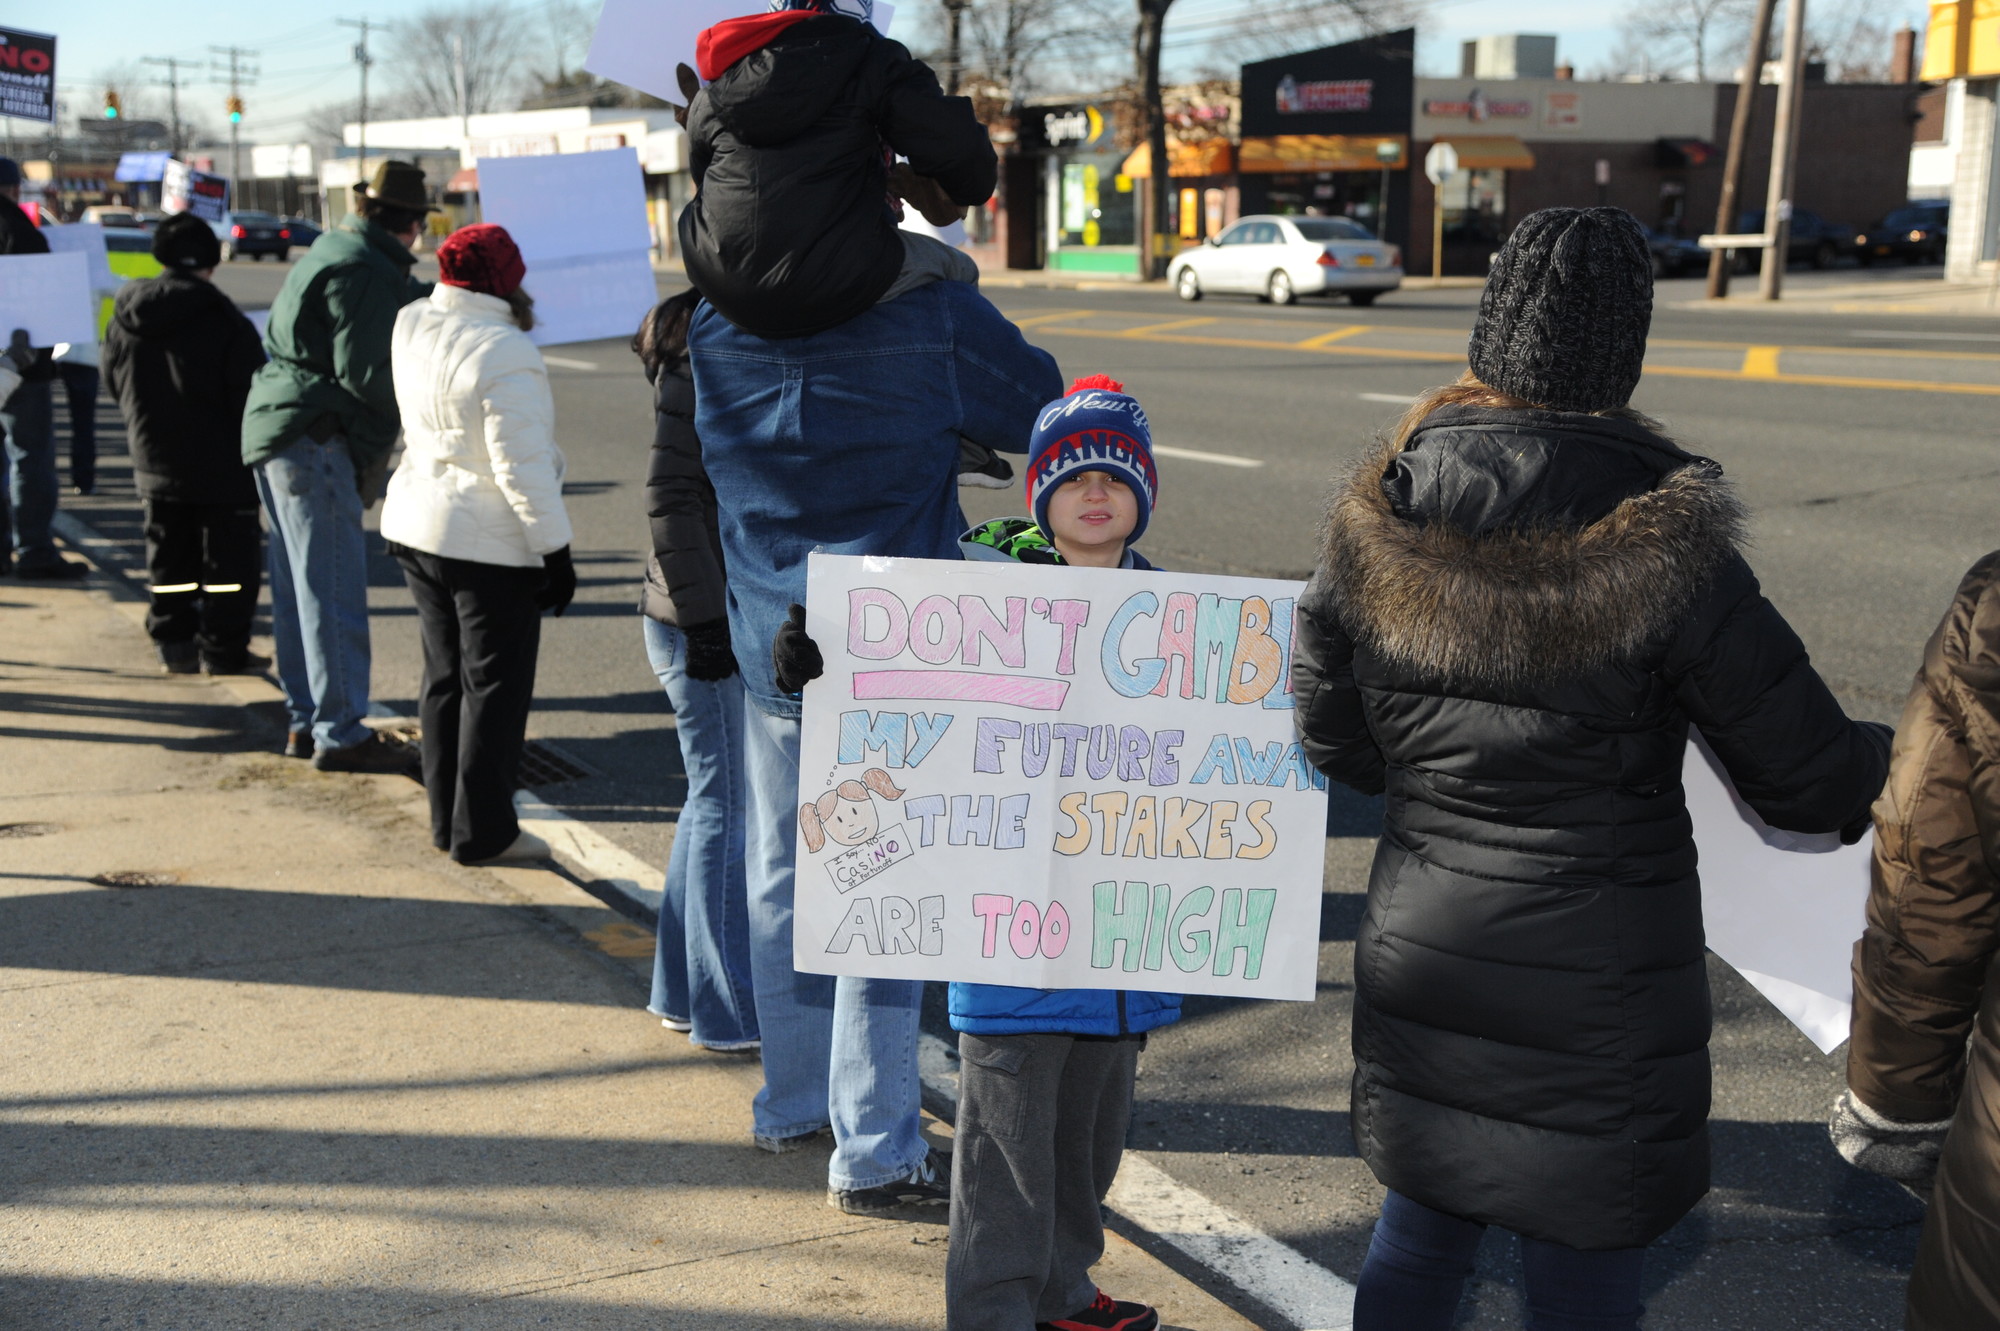 Chris Desimone, 10, was one of many child protesters.